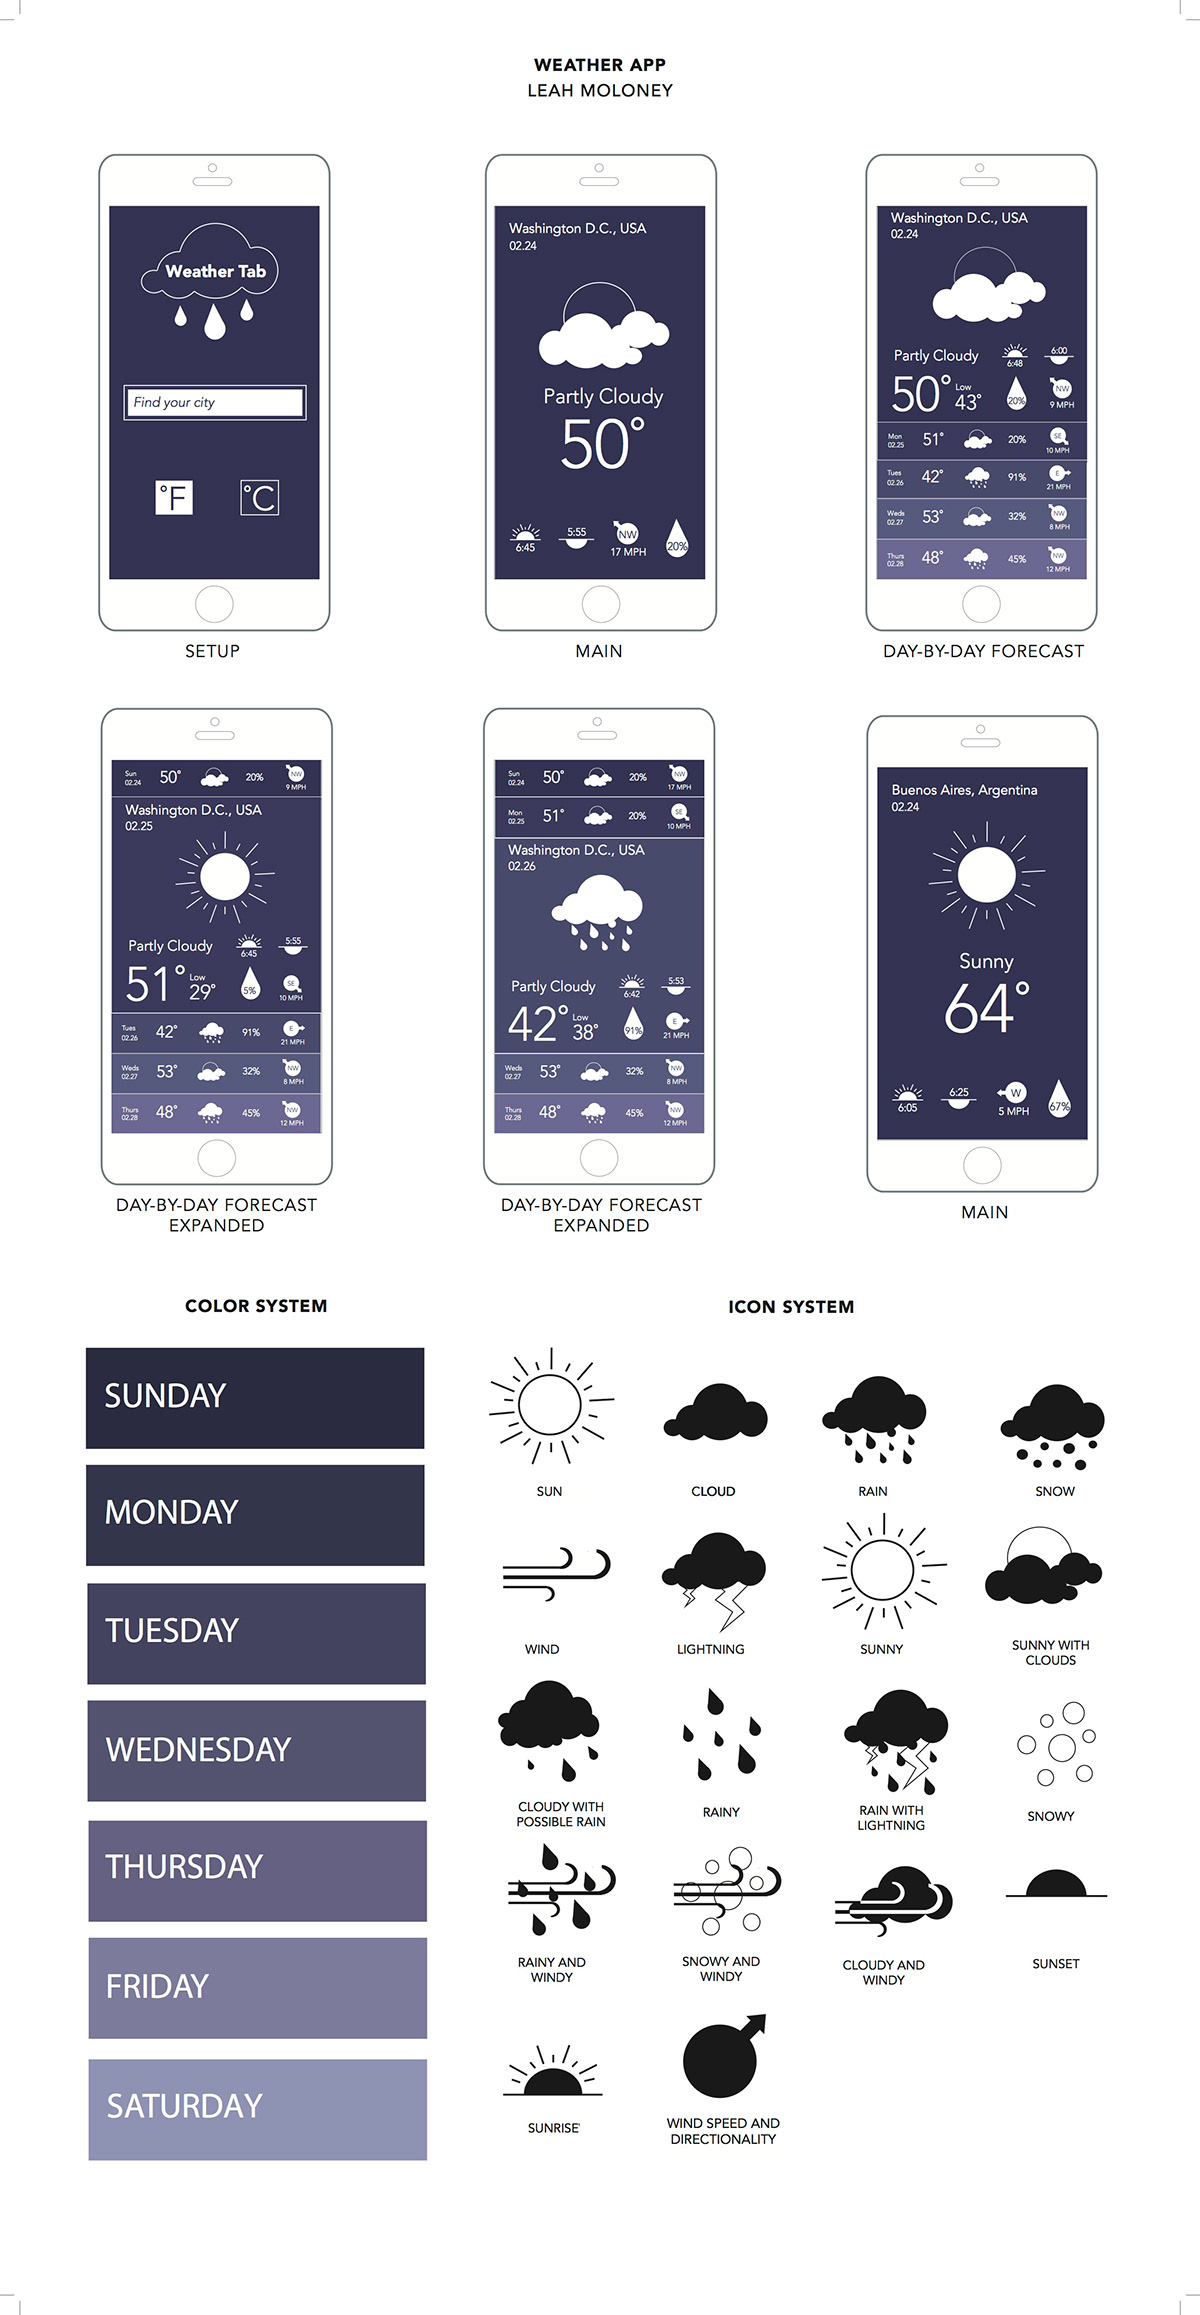 weather app iphone app wireframe icons wireframe design Phone App